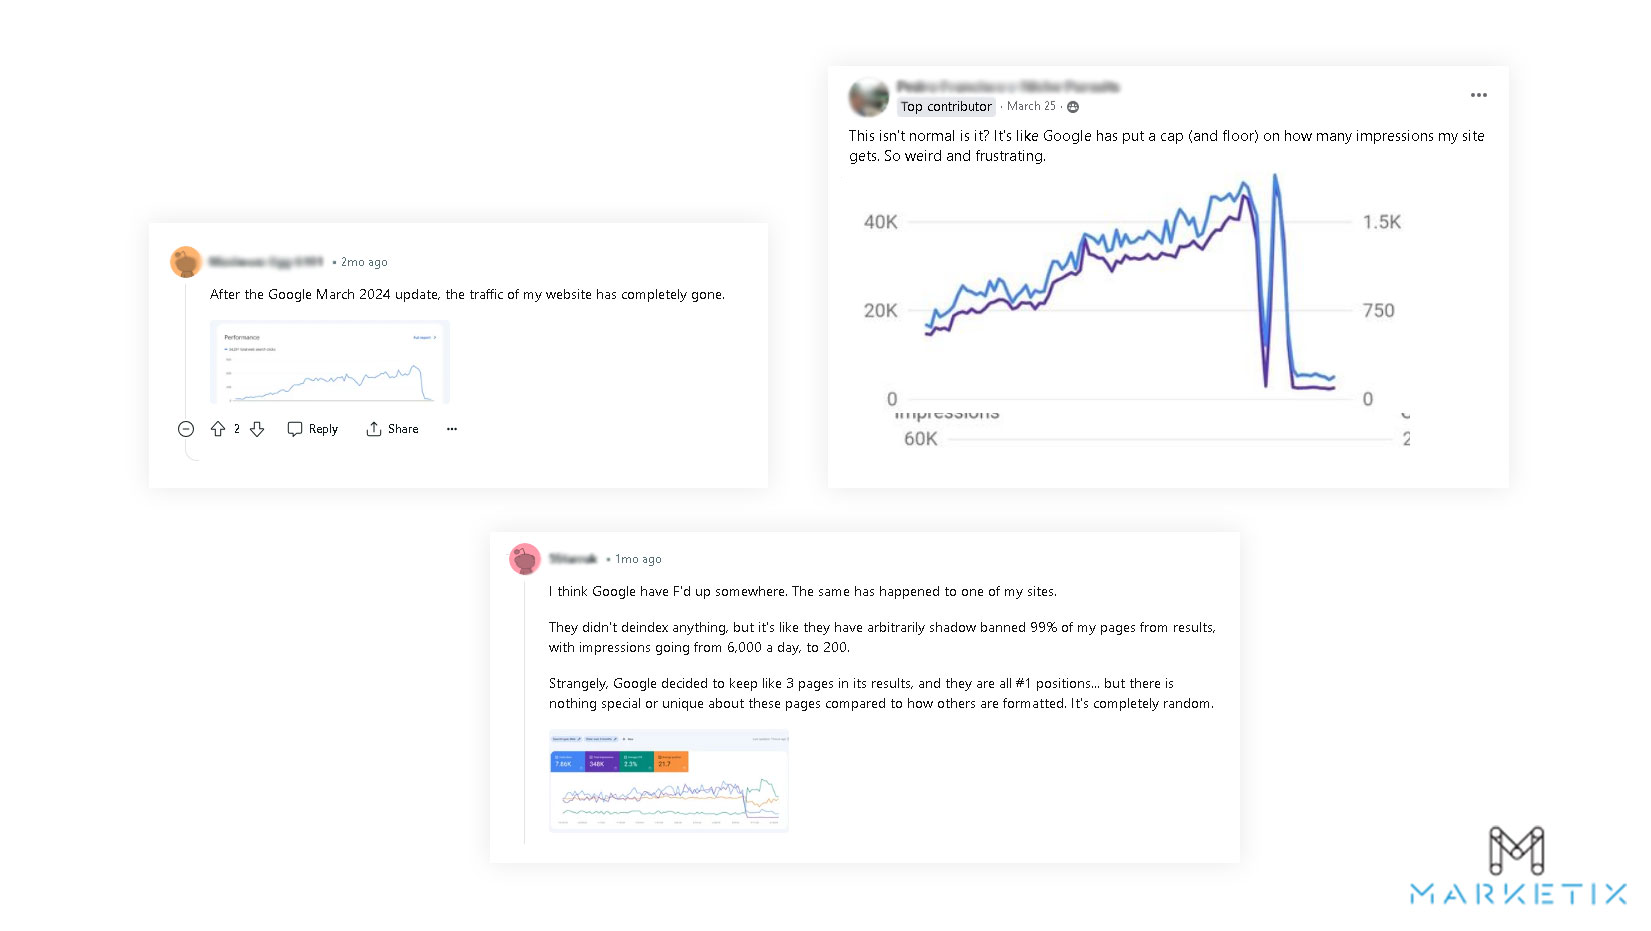 Redditors and Facebook group members sharing their website's traffic drop after the recent Google Algorithm update in March